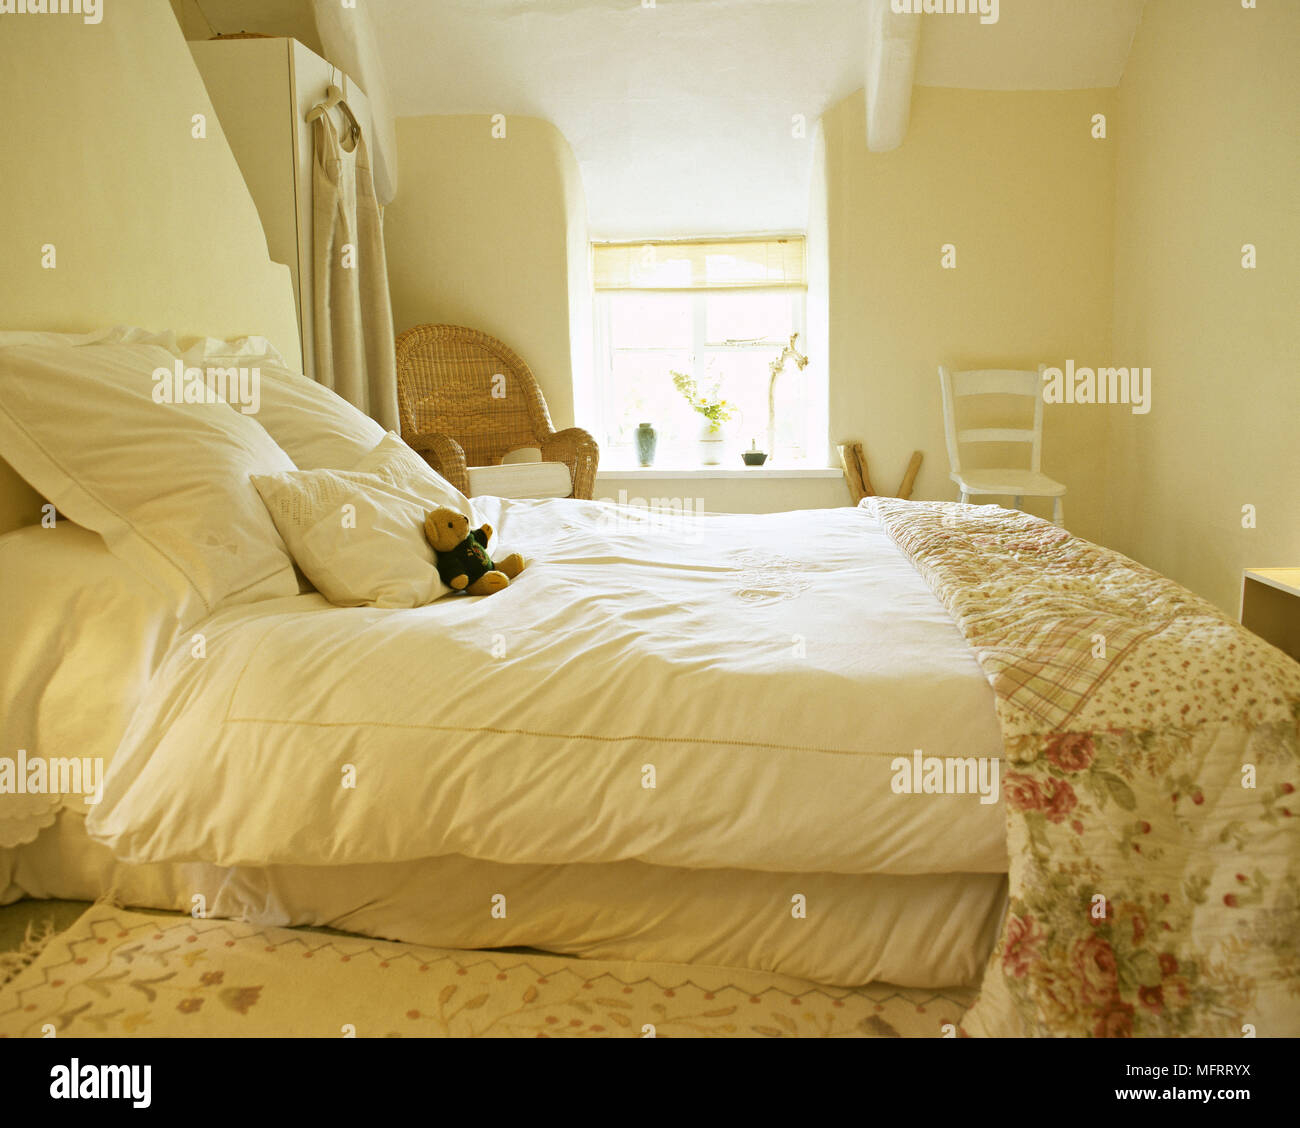 Country yellow bedroom with floral coverlet and a sunny window. Stock Photo